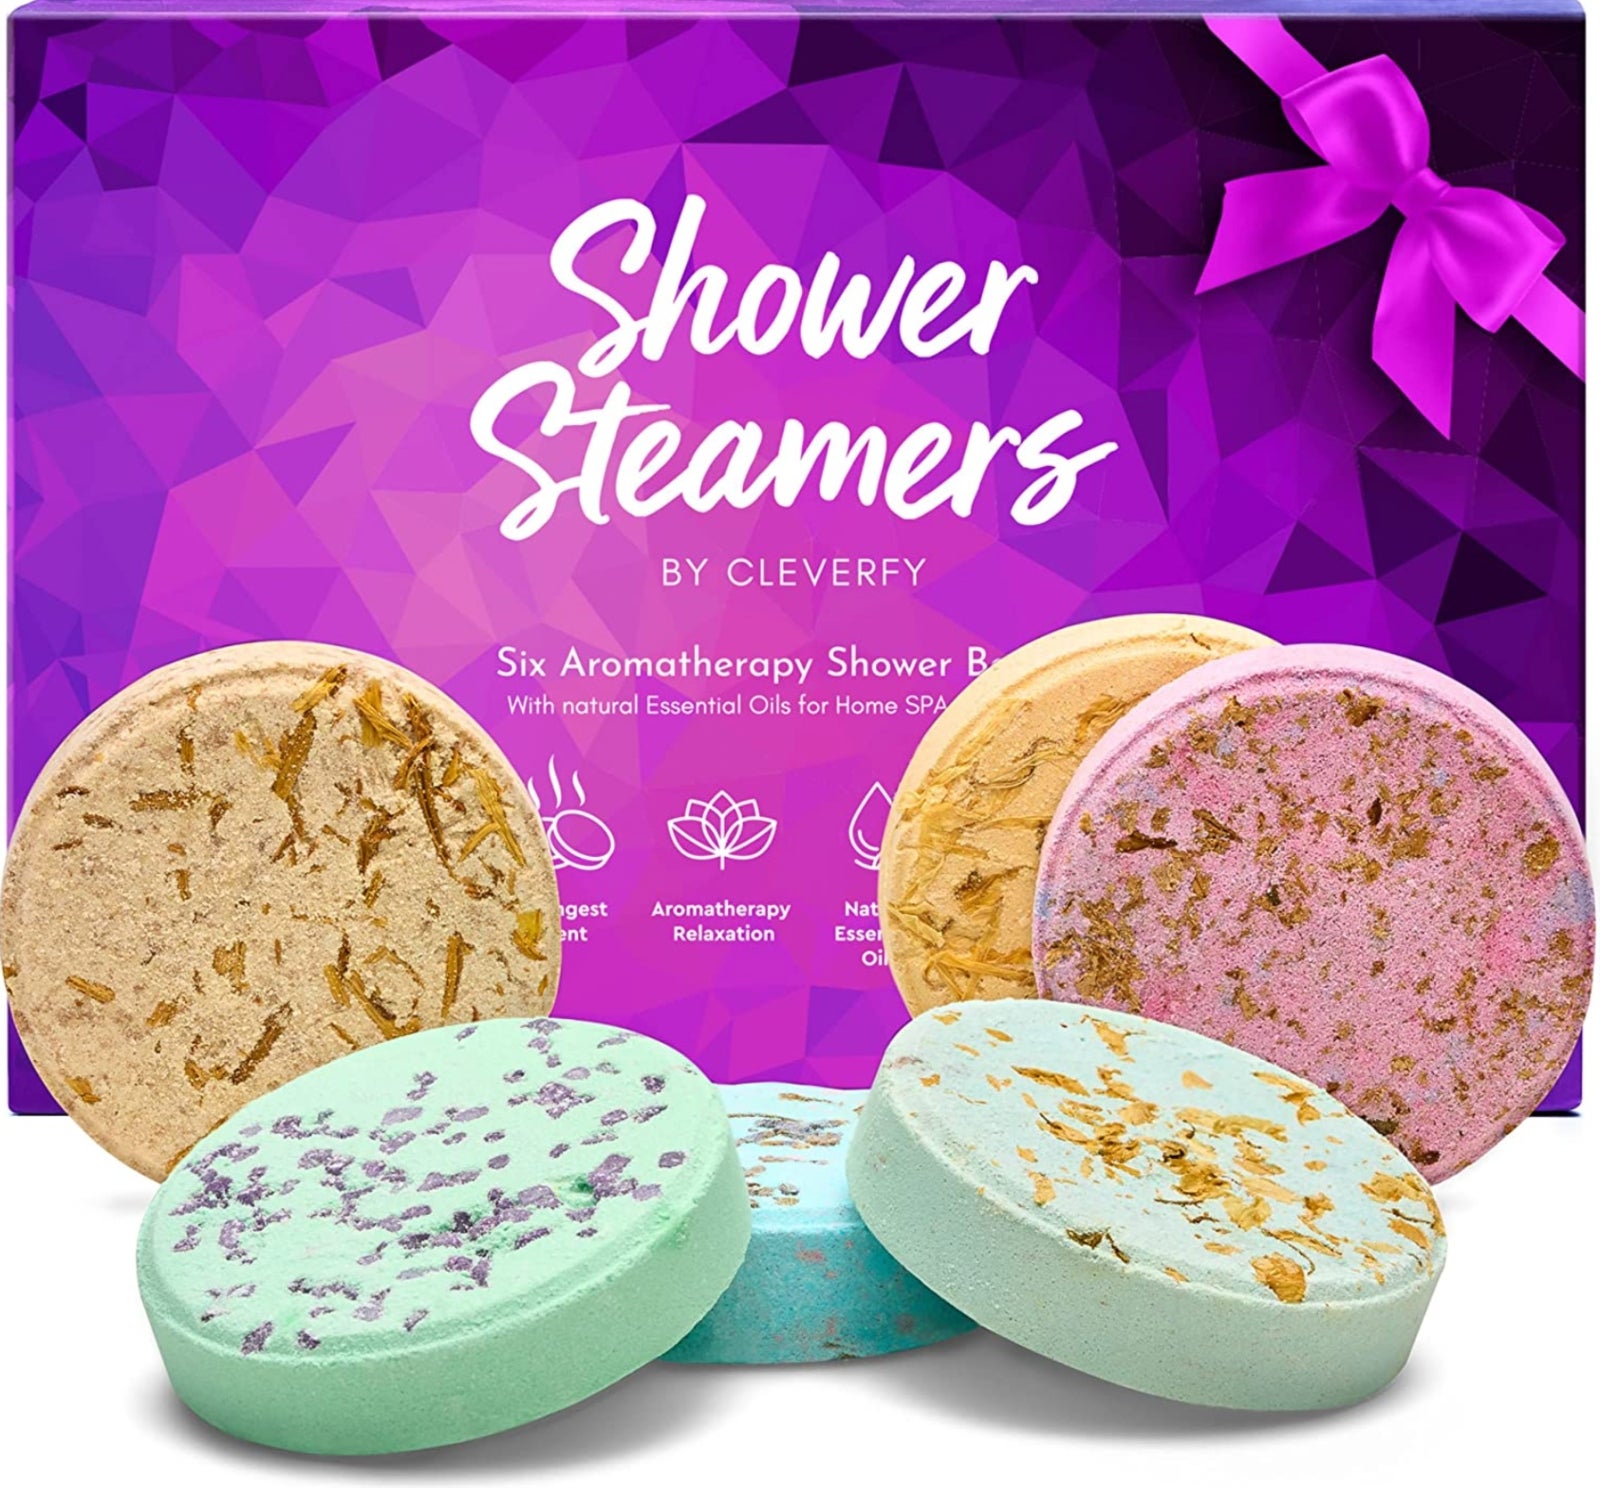 the shower steamers